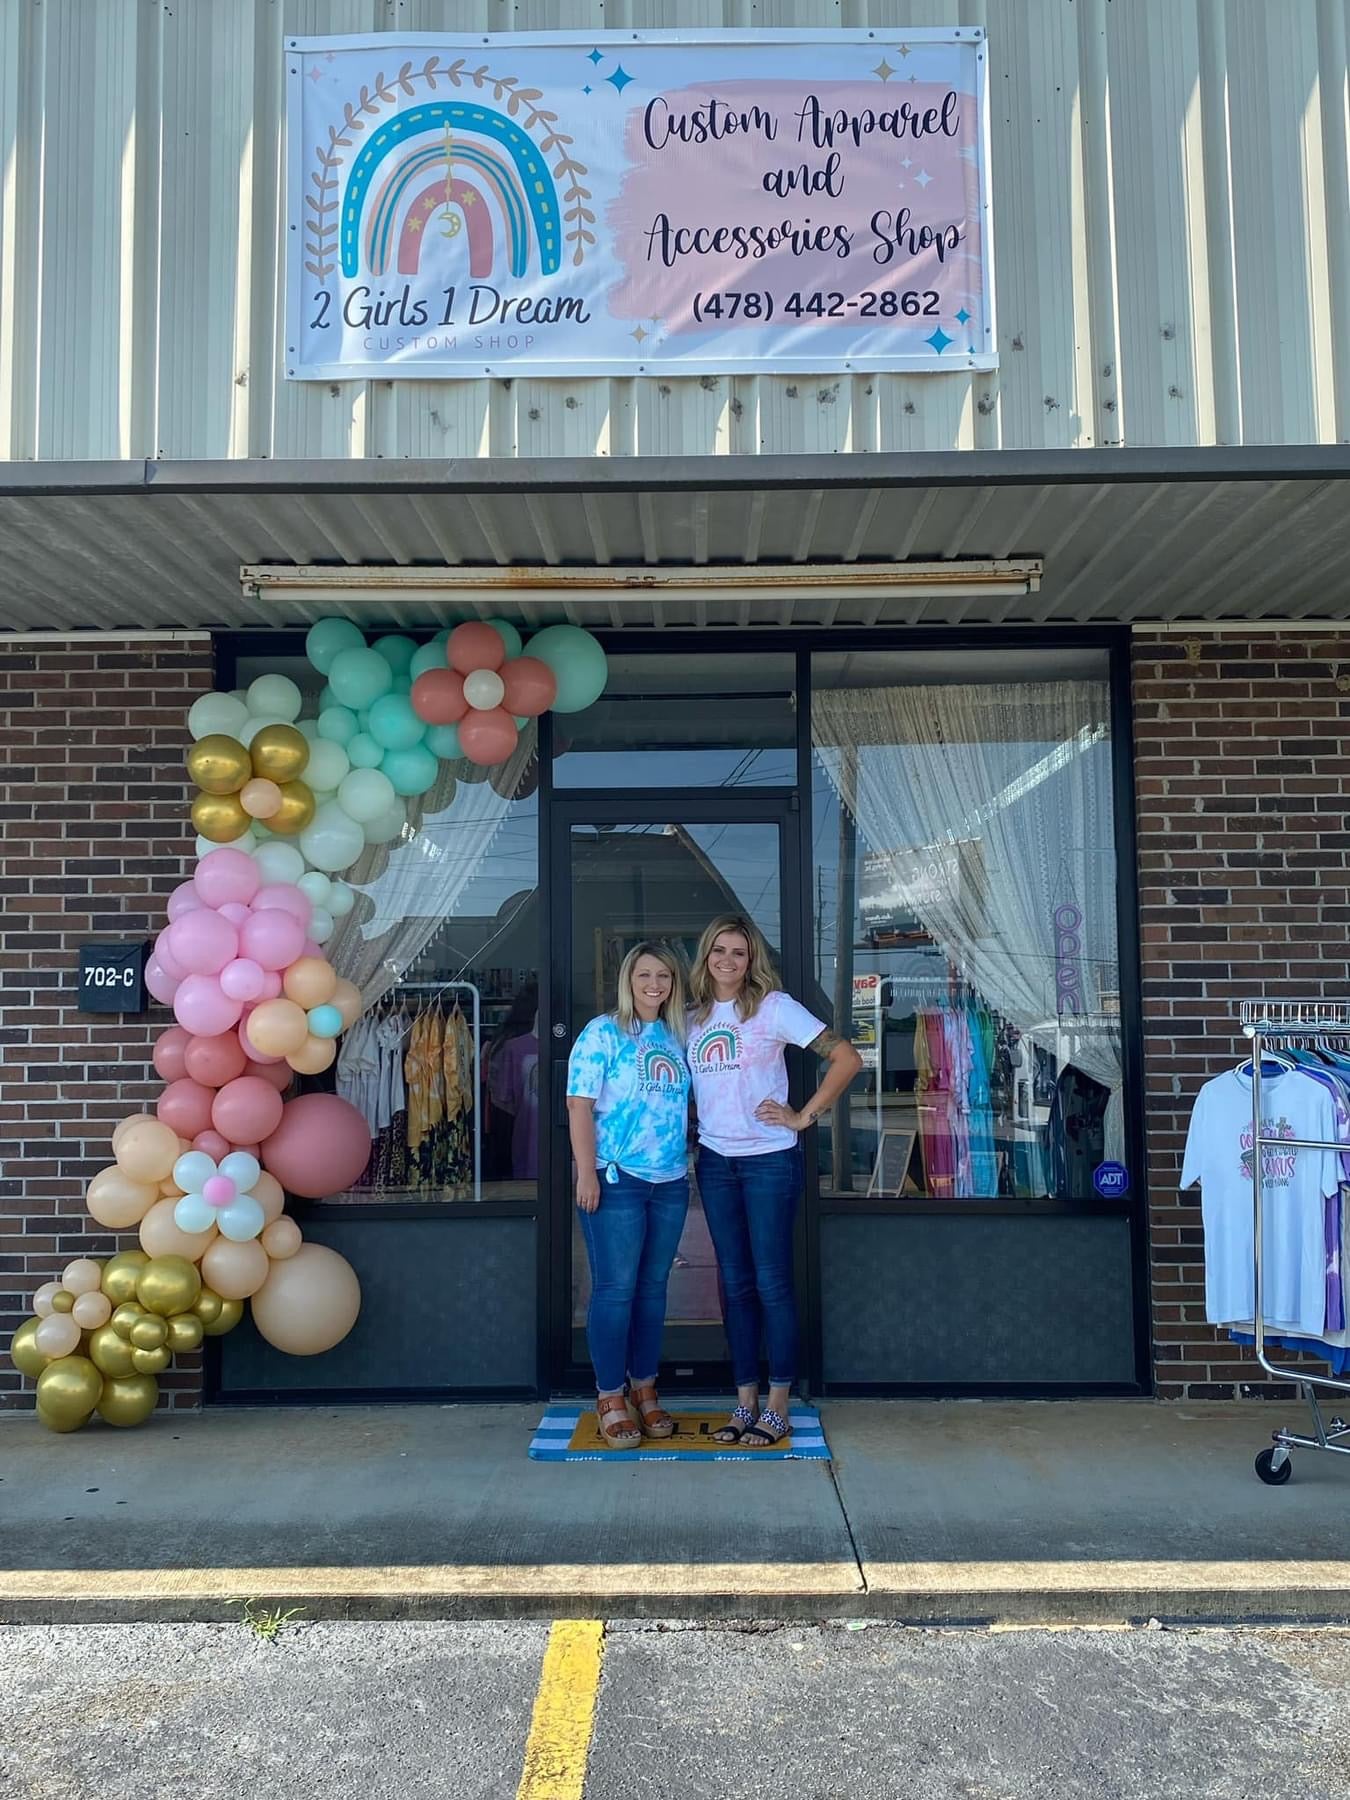 Children's Consignment Store Wee Boutique Offers Custom Creations